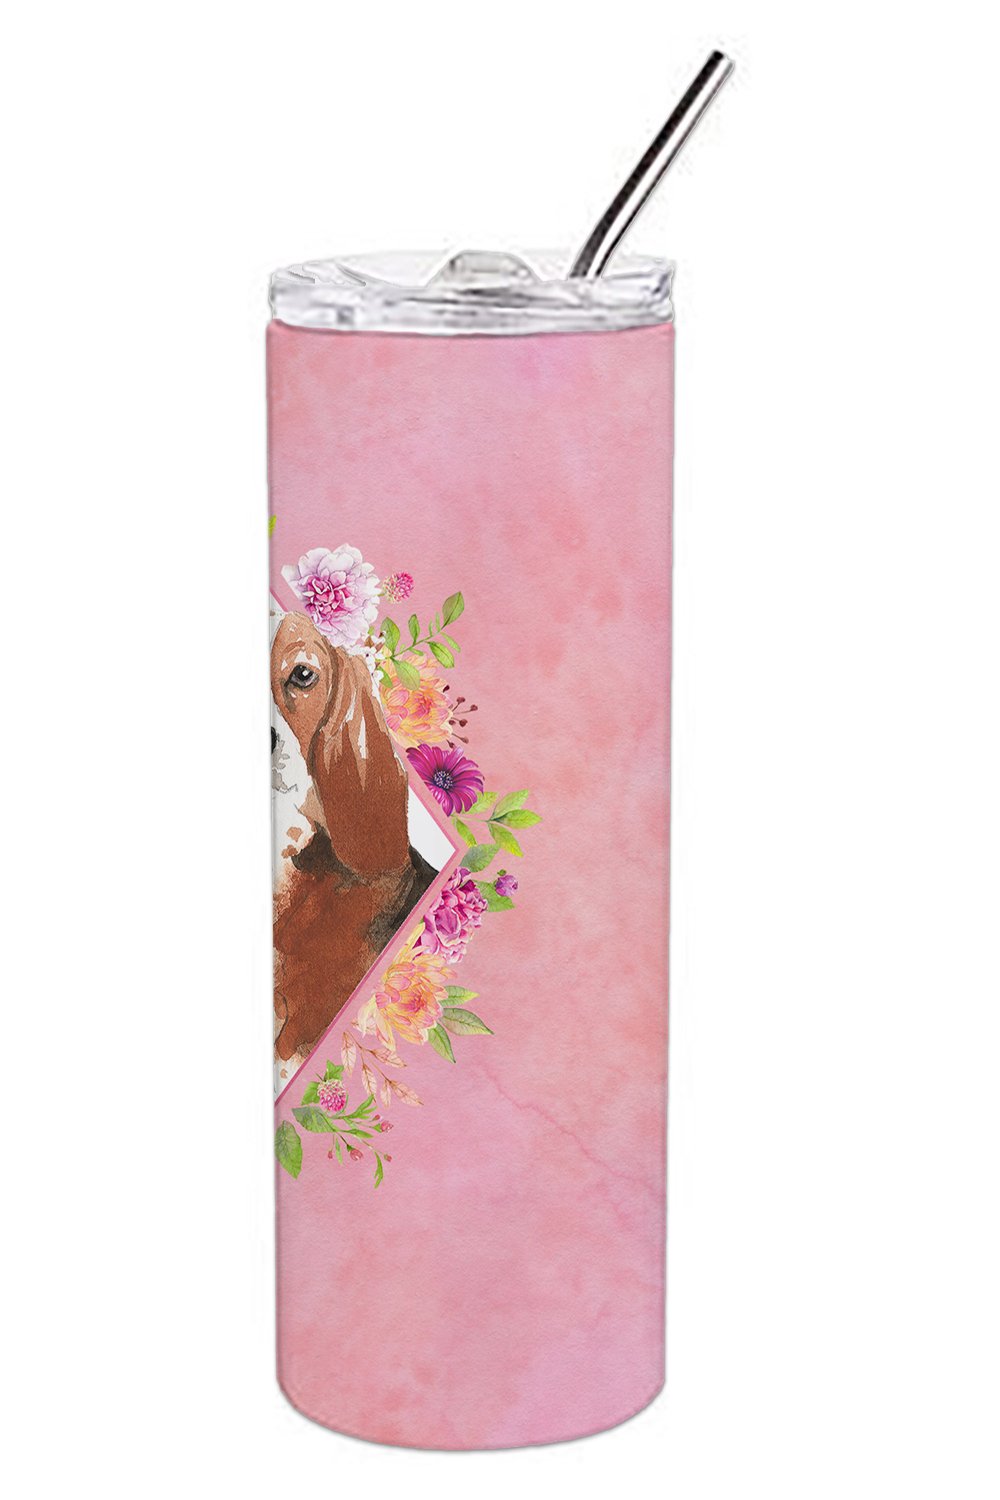 Basset Hound Pink Flowers Double Walled Stainless Steel 20 oz Skinny Tumbler CK4266TBL20 by Caroline's Treasures